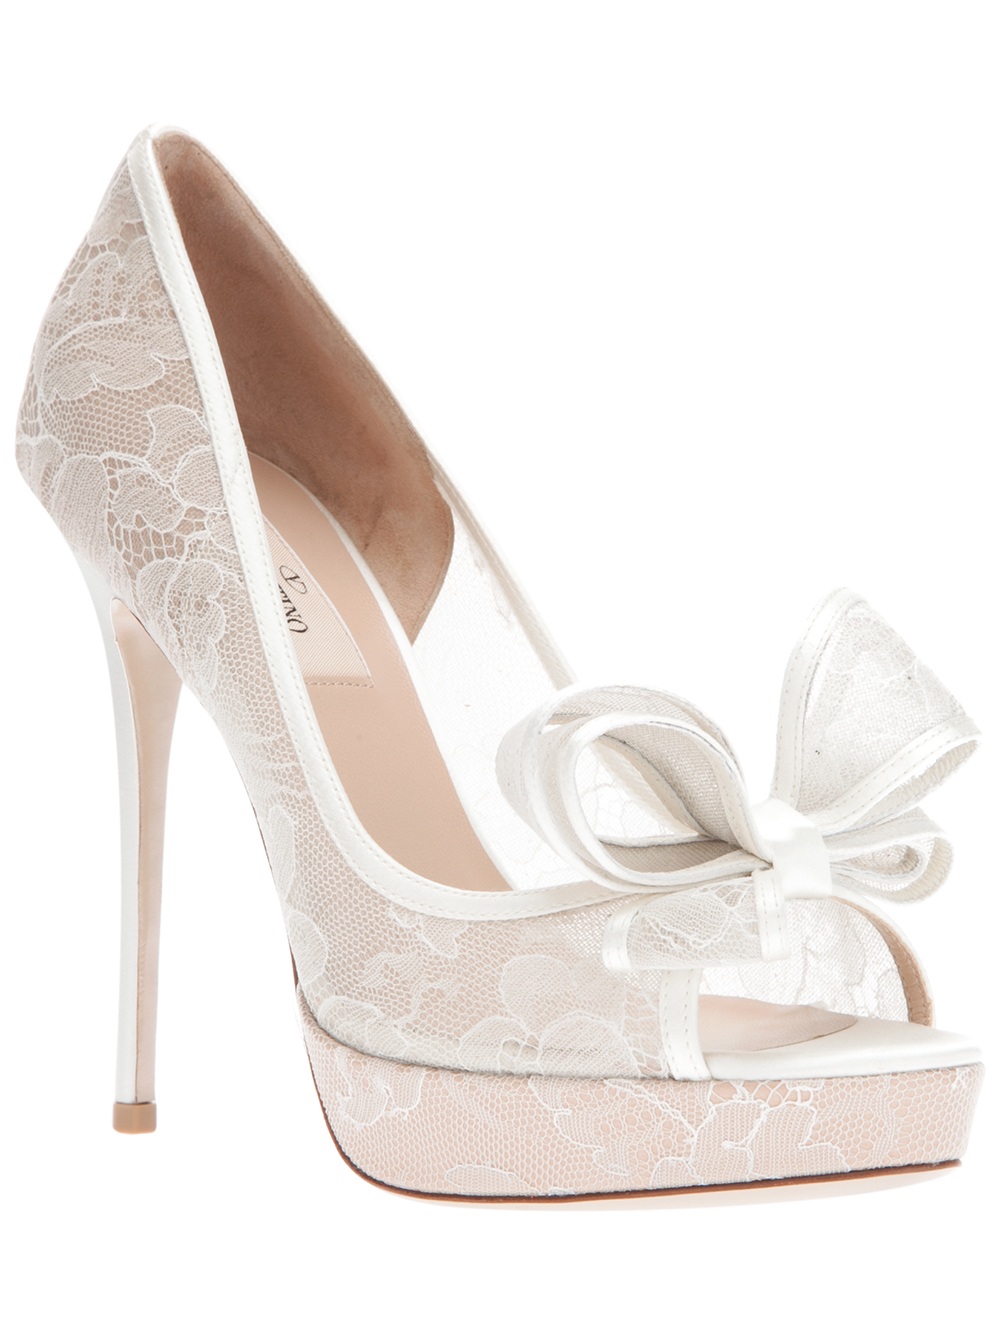 Valentino Bow Lace Pumps in White | Lyst